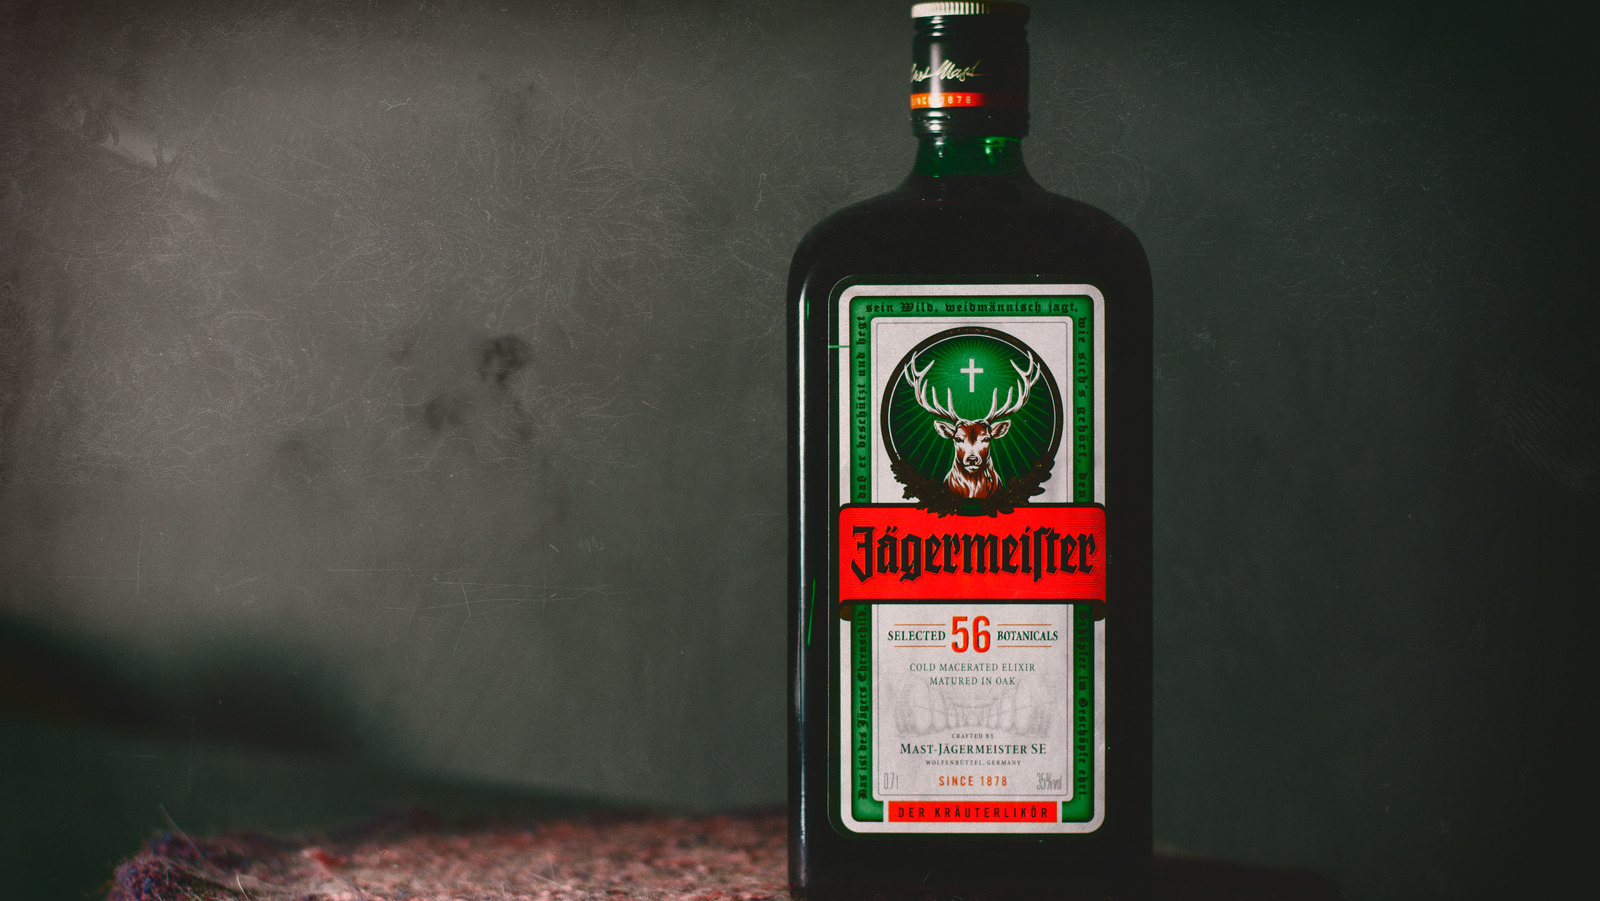 What Does Jägermeister Have to Do with Saint Hubert?